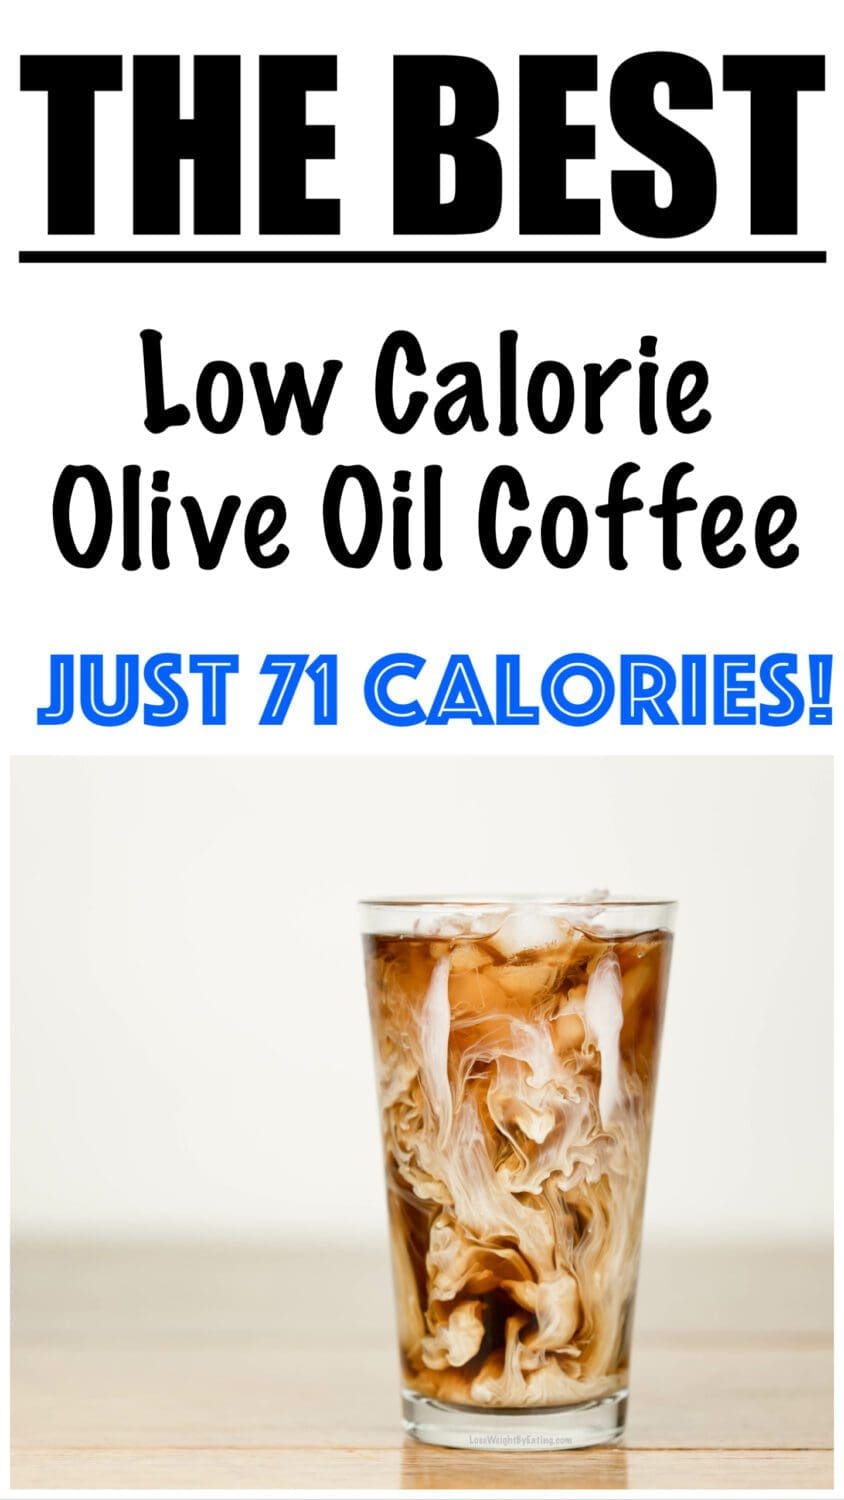 Healthy Coffee with Olive Oil